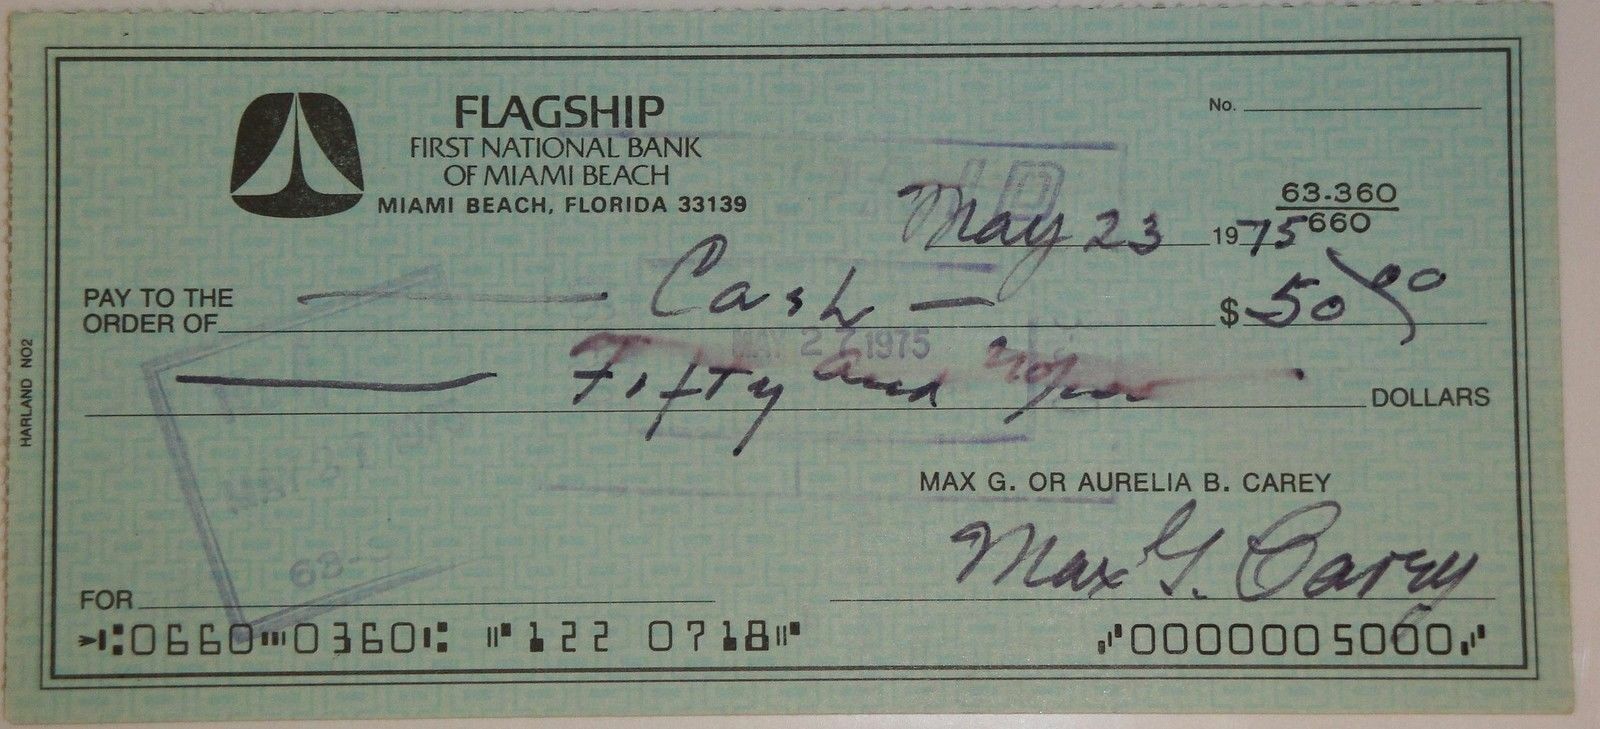 Max Carey Hand Signed Autographed Personal Check $50.00